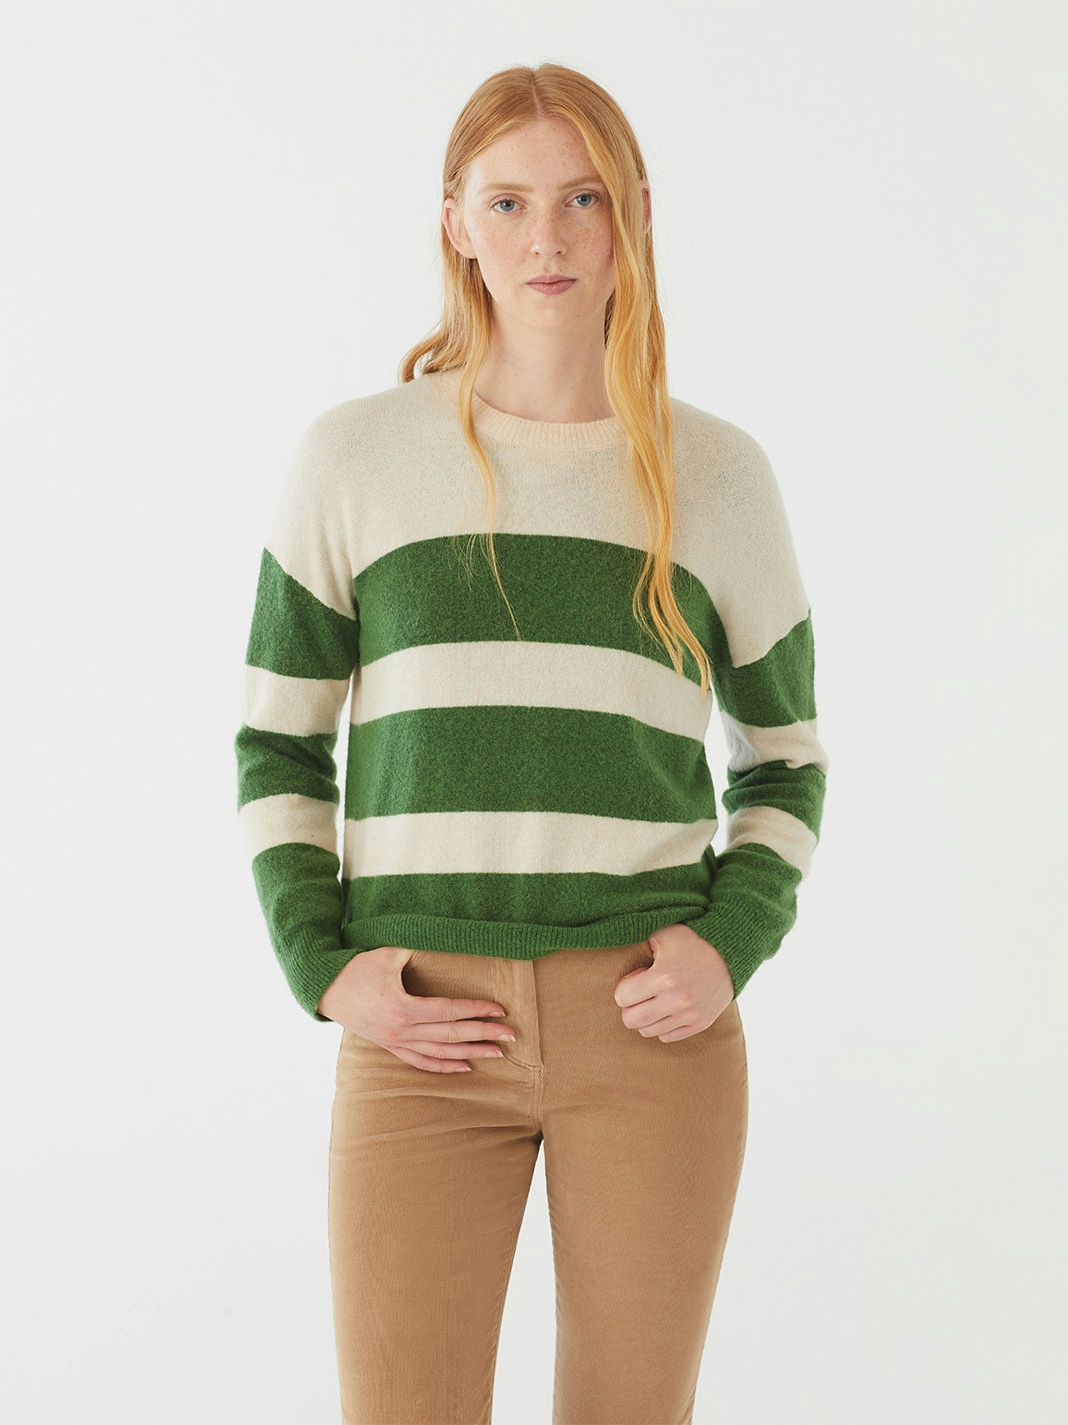 Two-color striped sweater